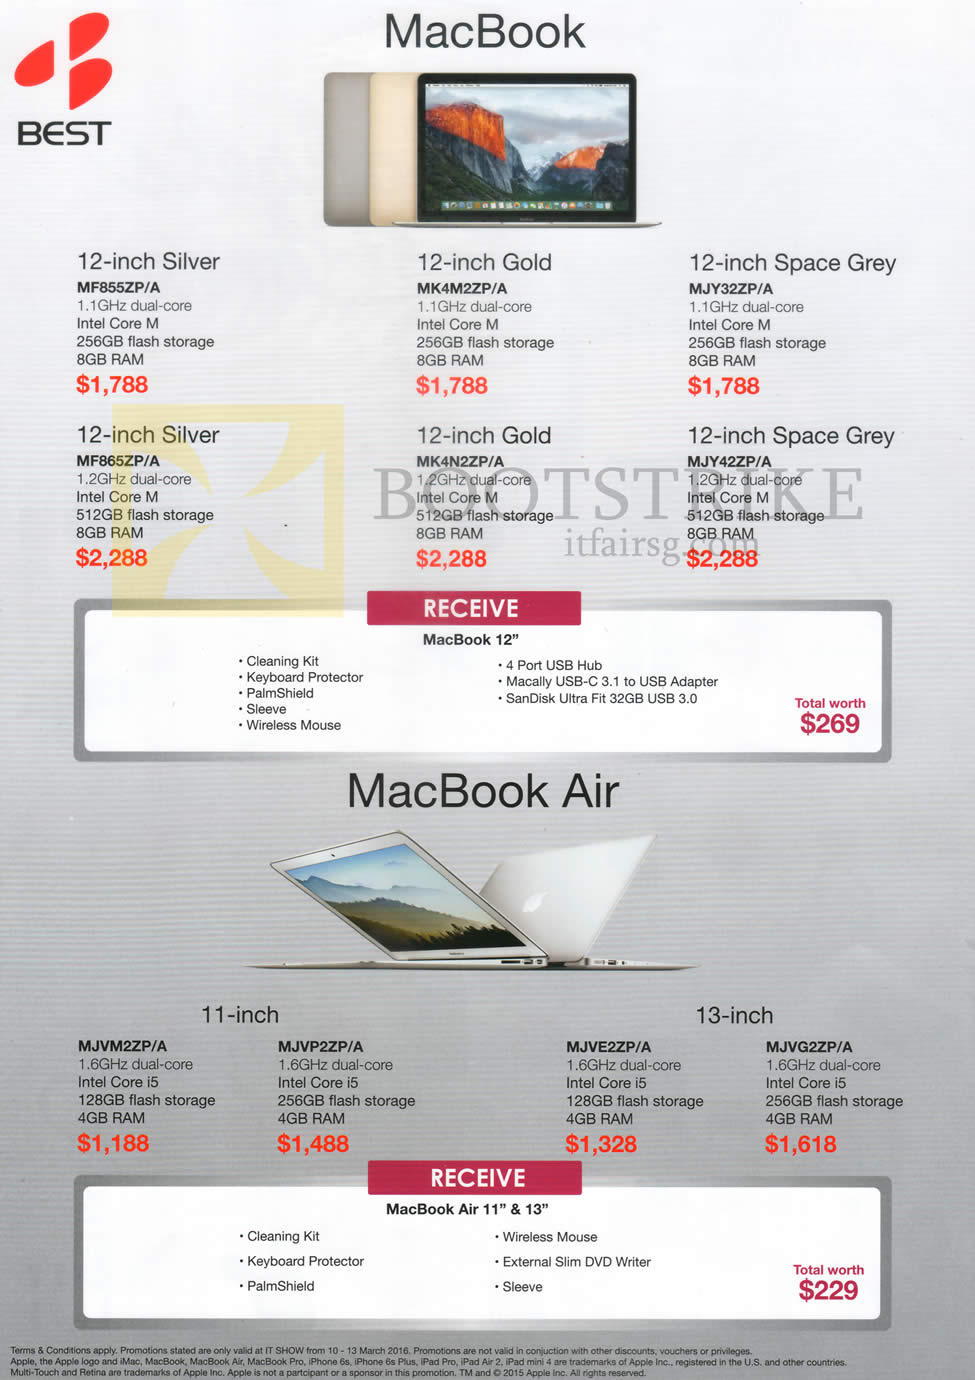 IT SHOW 2016 price list image brochure of Best Denki Apple MacBook Notebooks, MacBook Air 12-Inch Silver, Gold, Space Gray, 11 Inch, 13 Inch